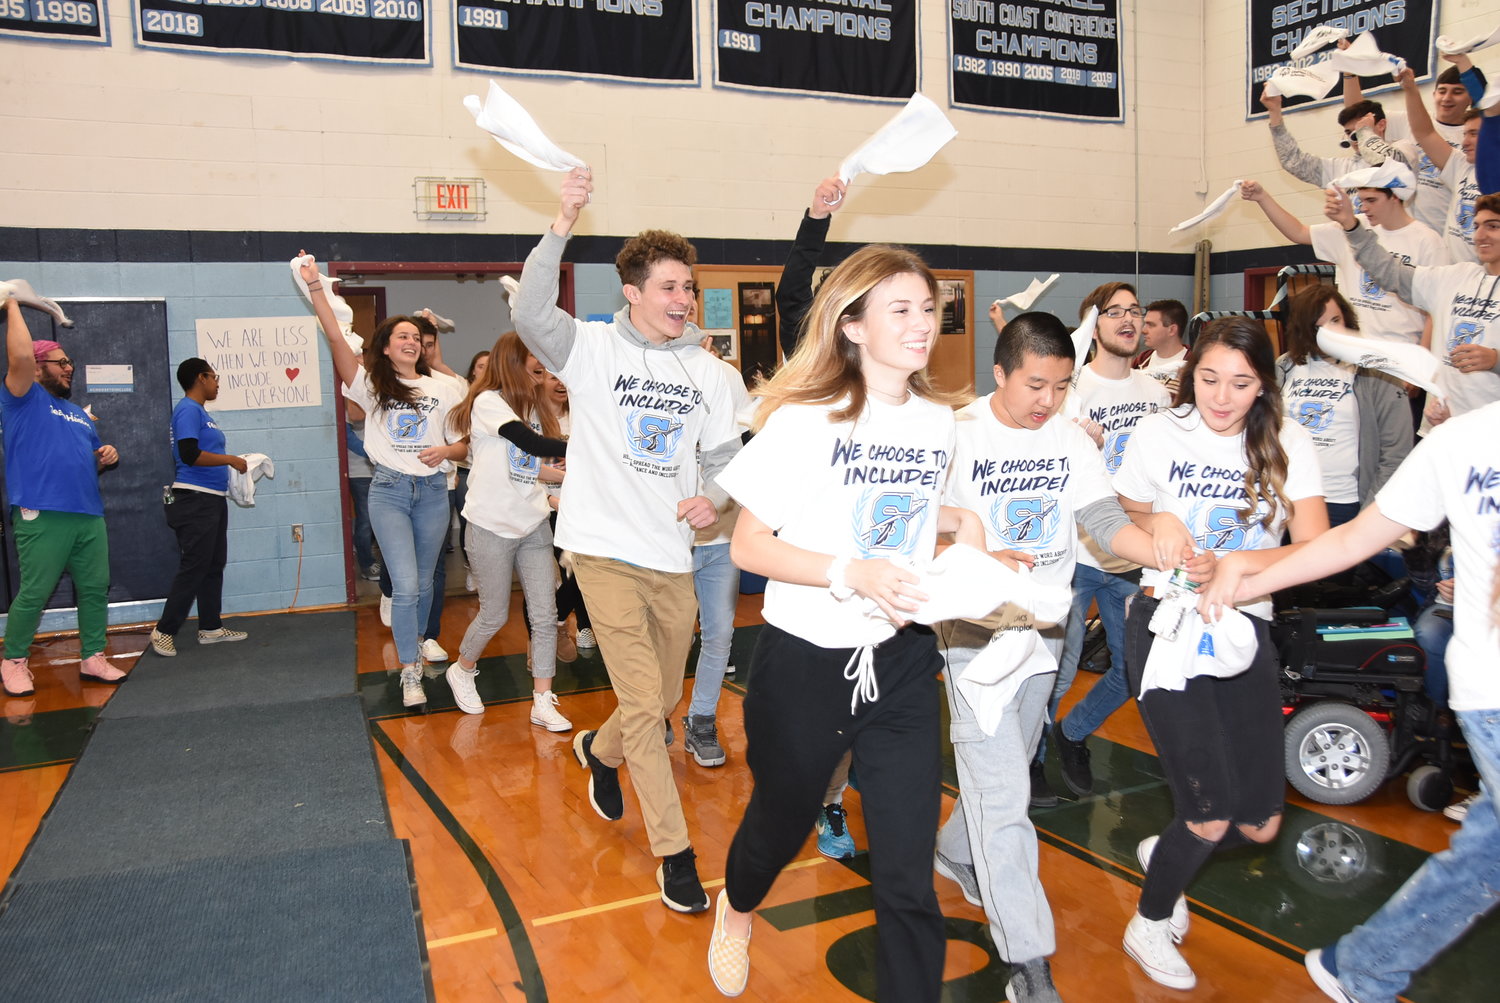 Members of the Unified team run into the gymnasium for the School-wide Assembly.